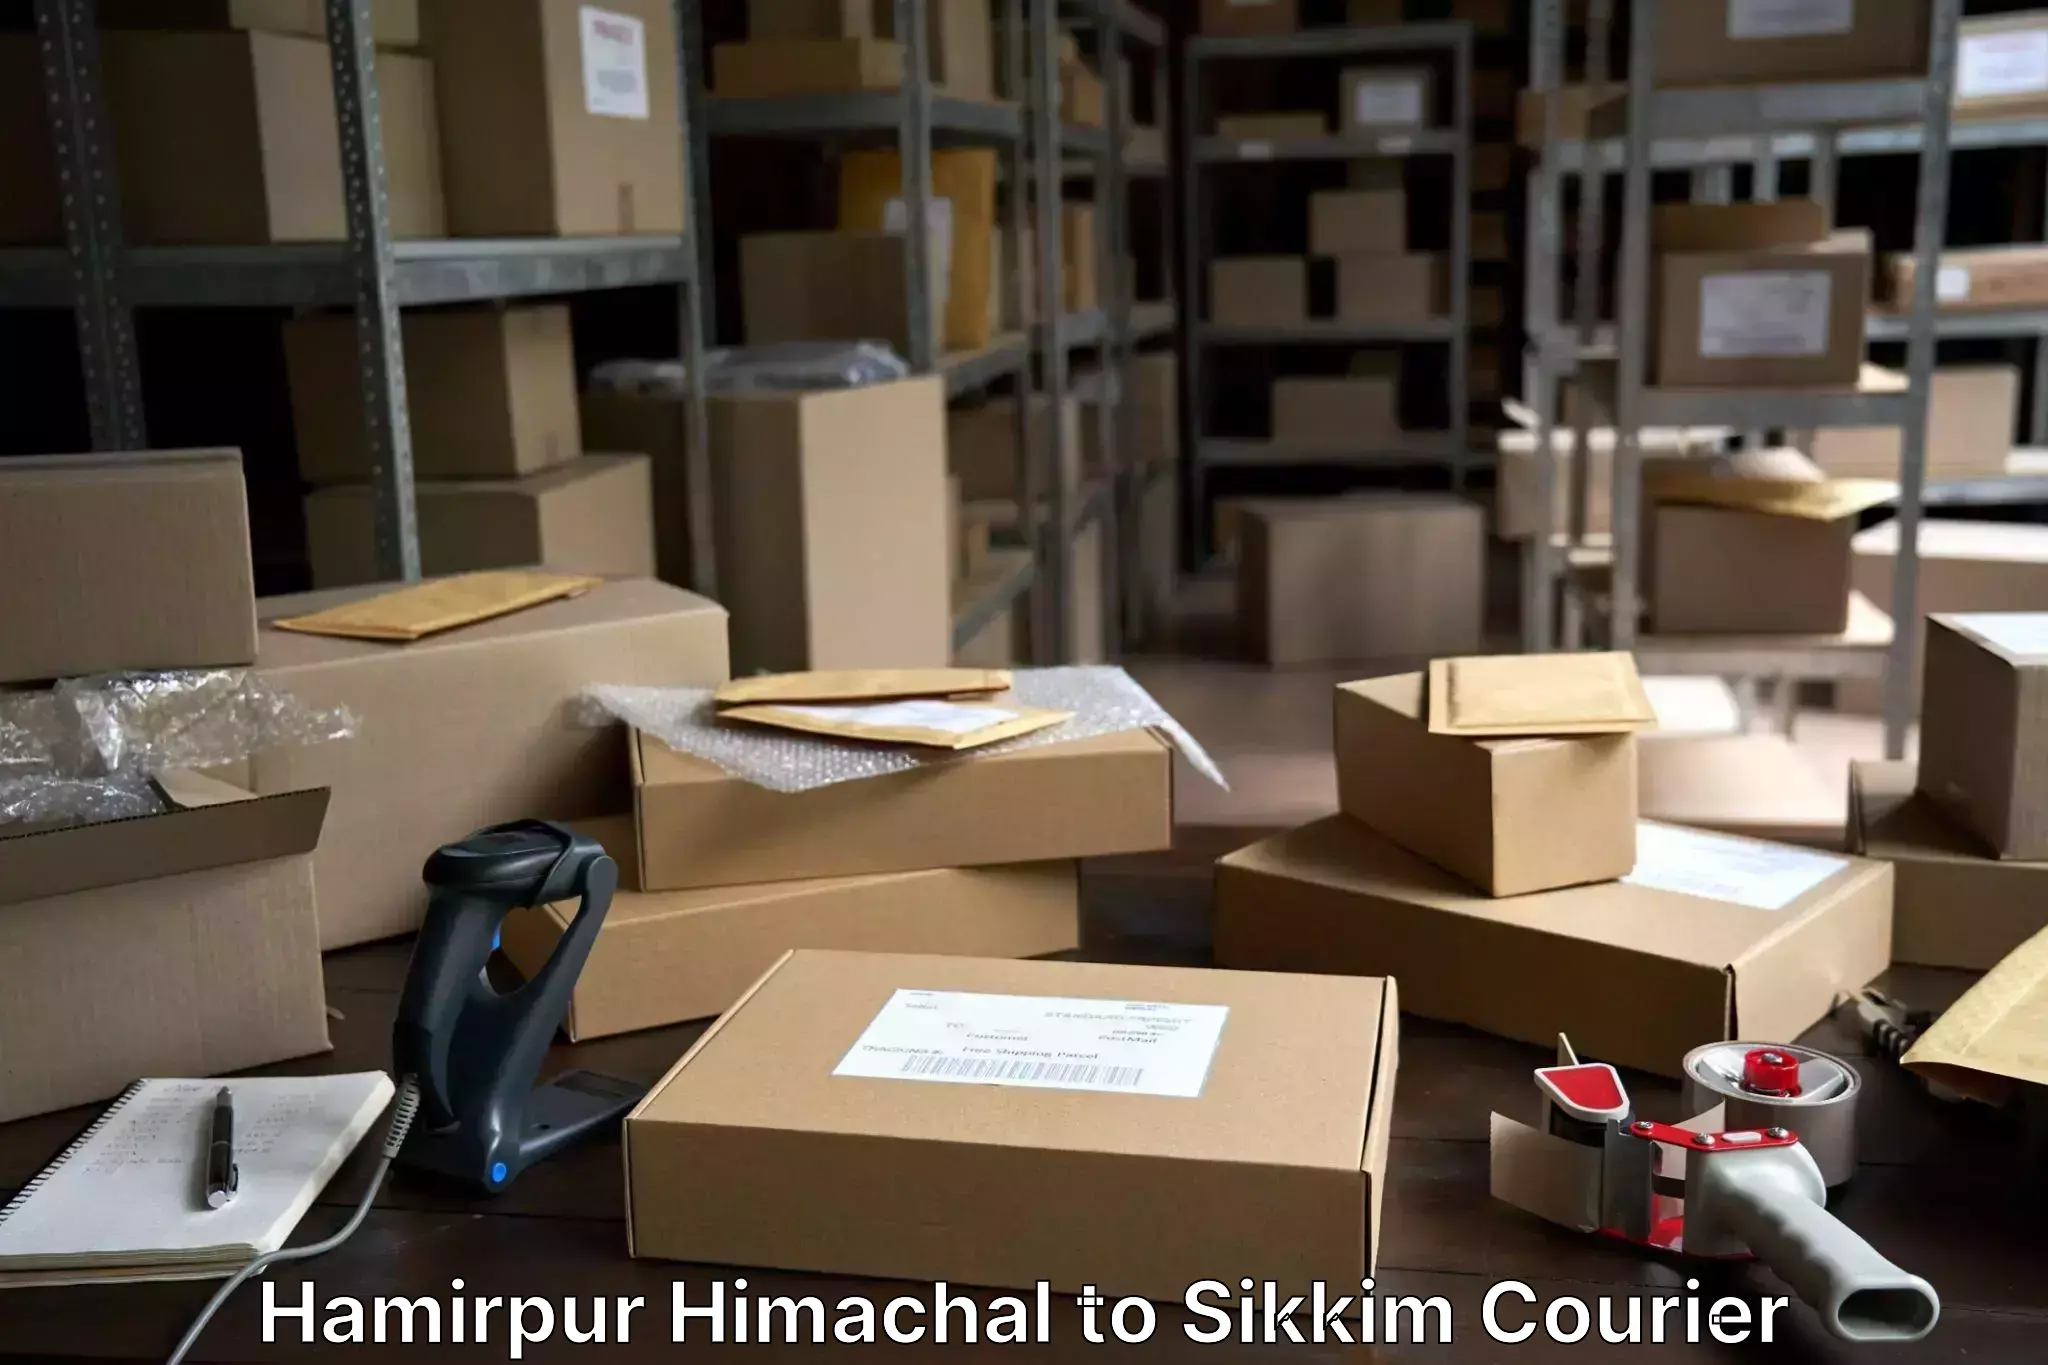 Online luggage shipping booking Hamirpur Himachal to Sikkim